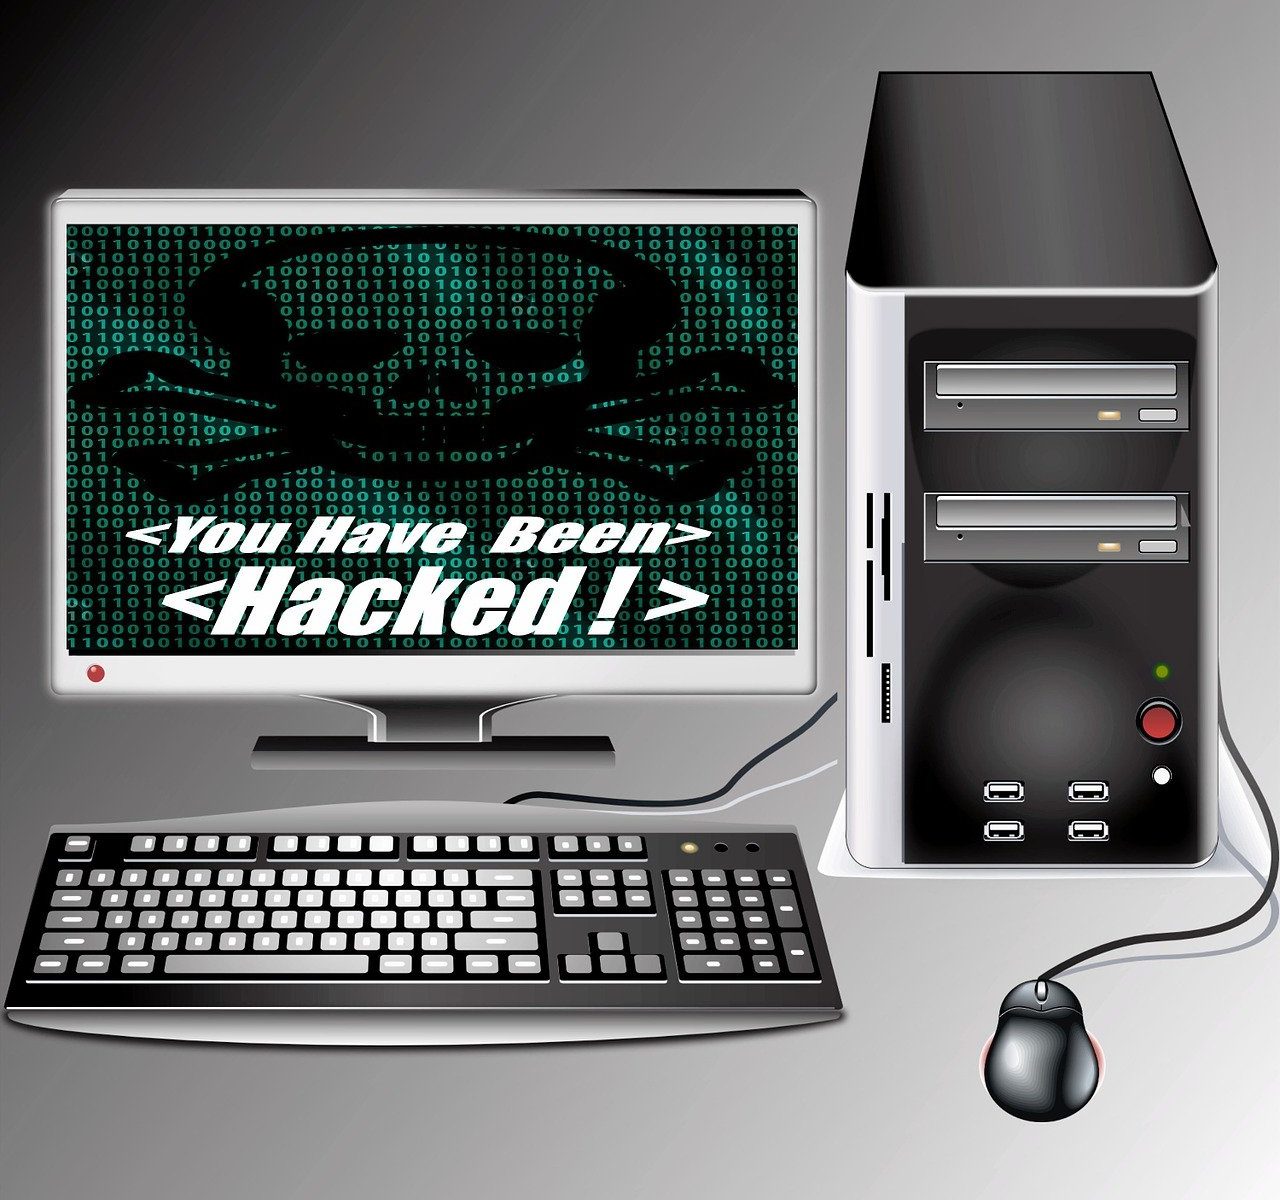 Computer with monitor and the monitor says "You have been hacked!"